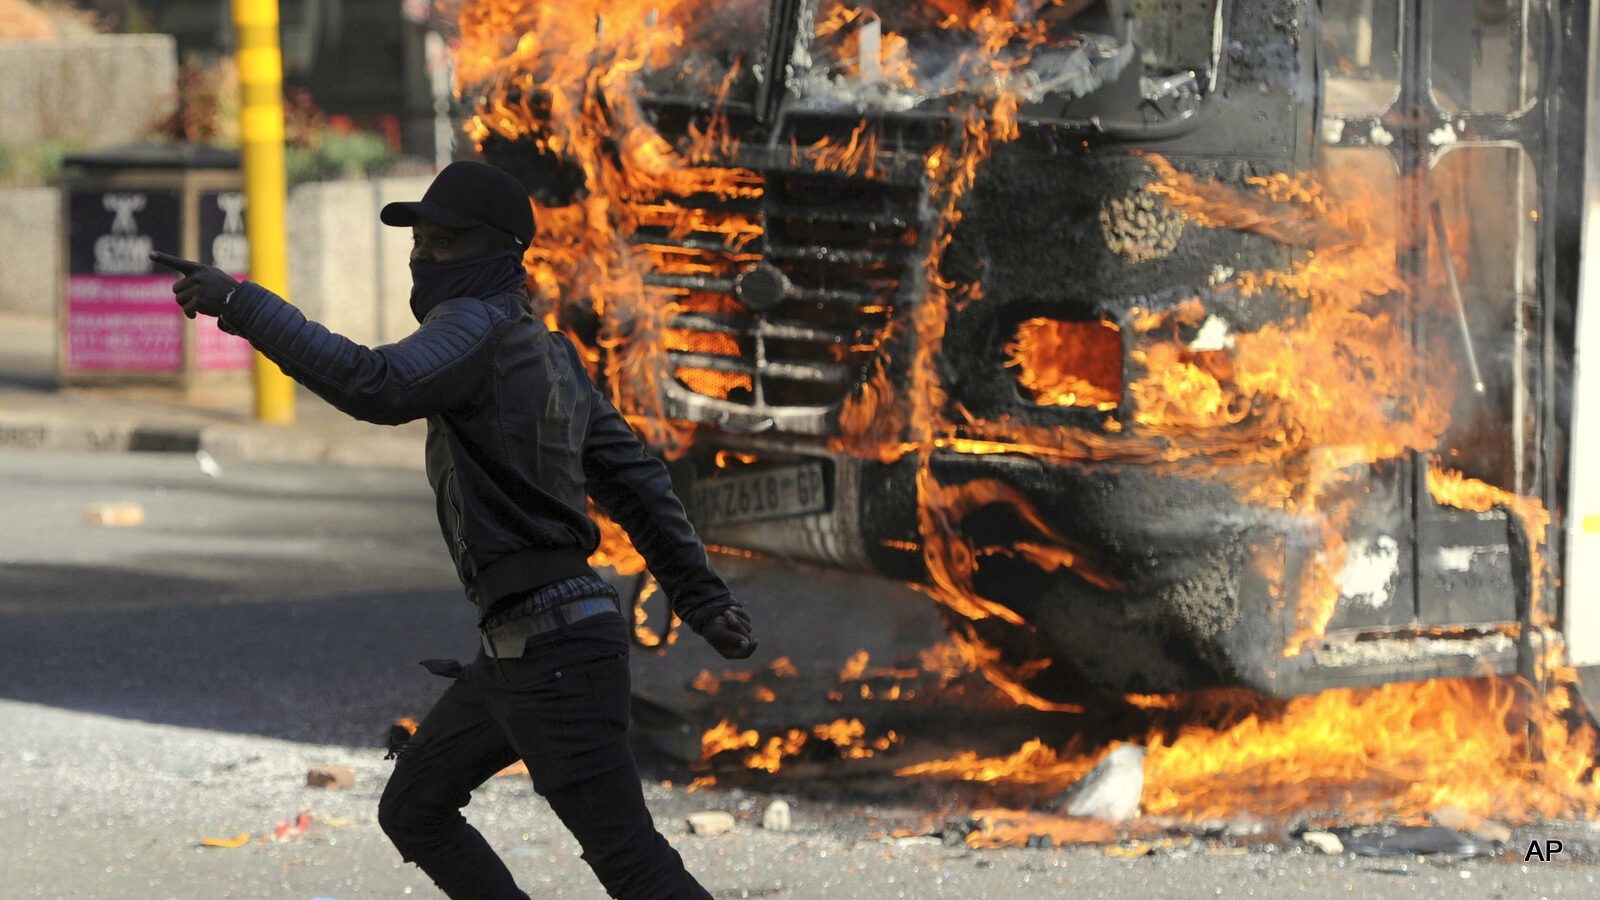 A protesting student runs past a burning bus off campus outside the University of the Witwatersrand in Johannesburg, South Africa on Monday, Oct. 10, 2016. Tear gas and water cannon were fired as hundreds of students protested at the university amid a bitter national dispute with university managers and the government over demonstrators' demands for free education, forcing student into the neighbouring city streets.